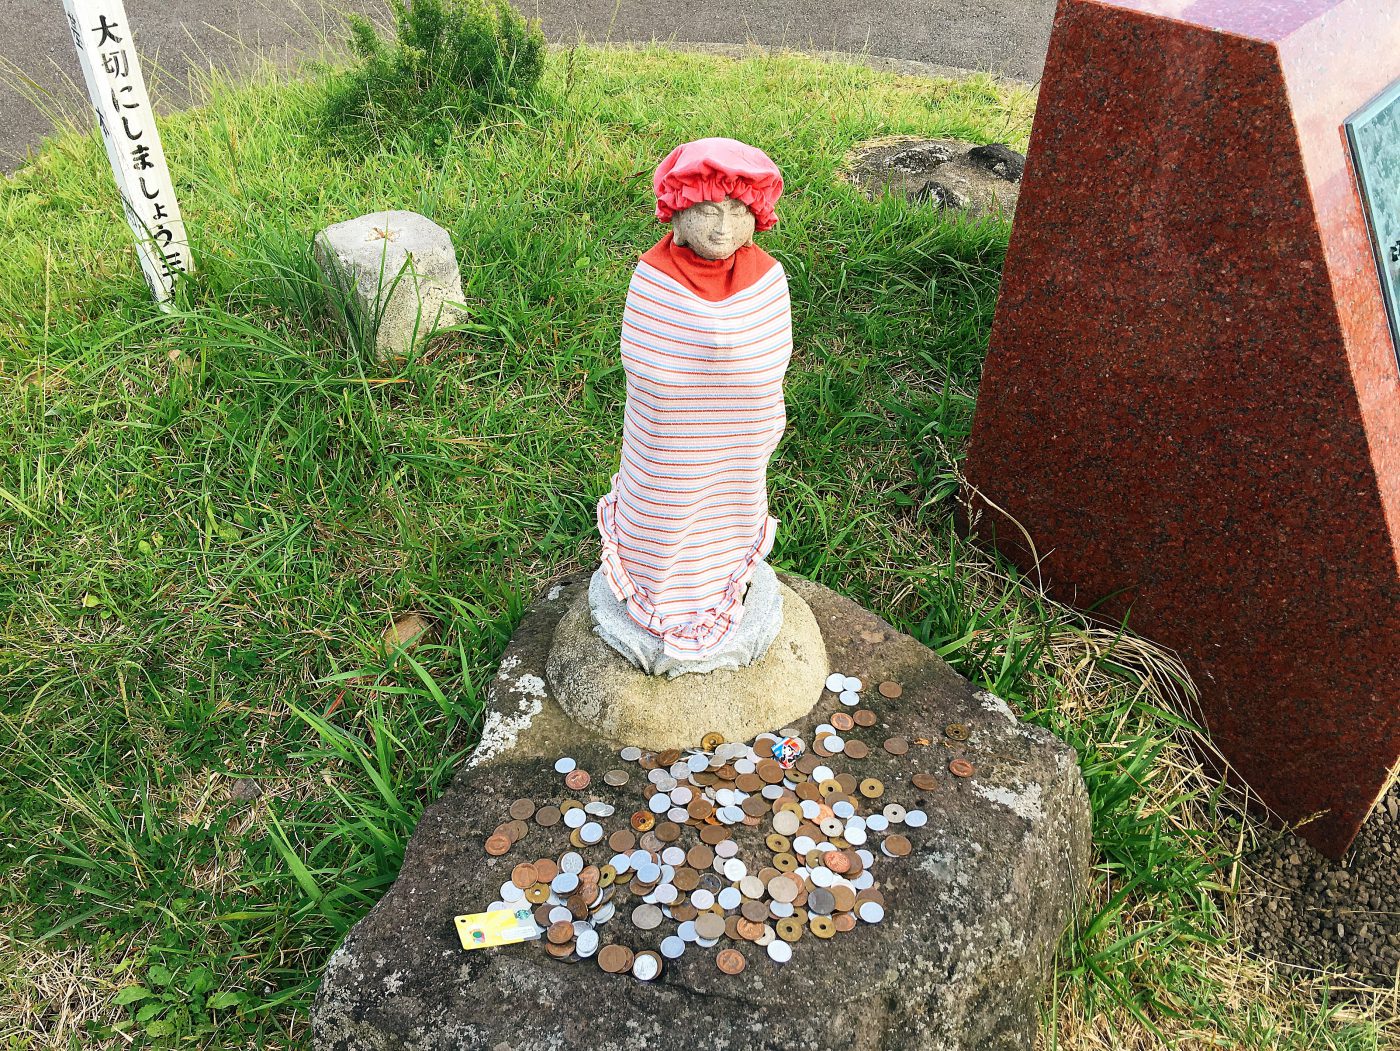 A little shrine with coin offerings